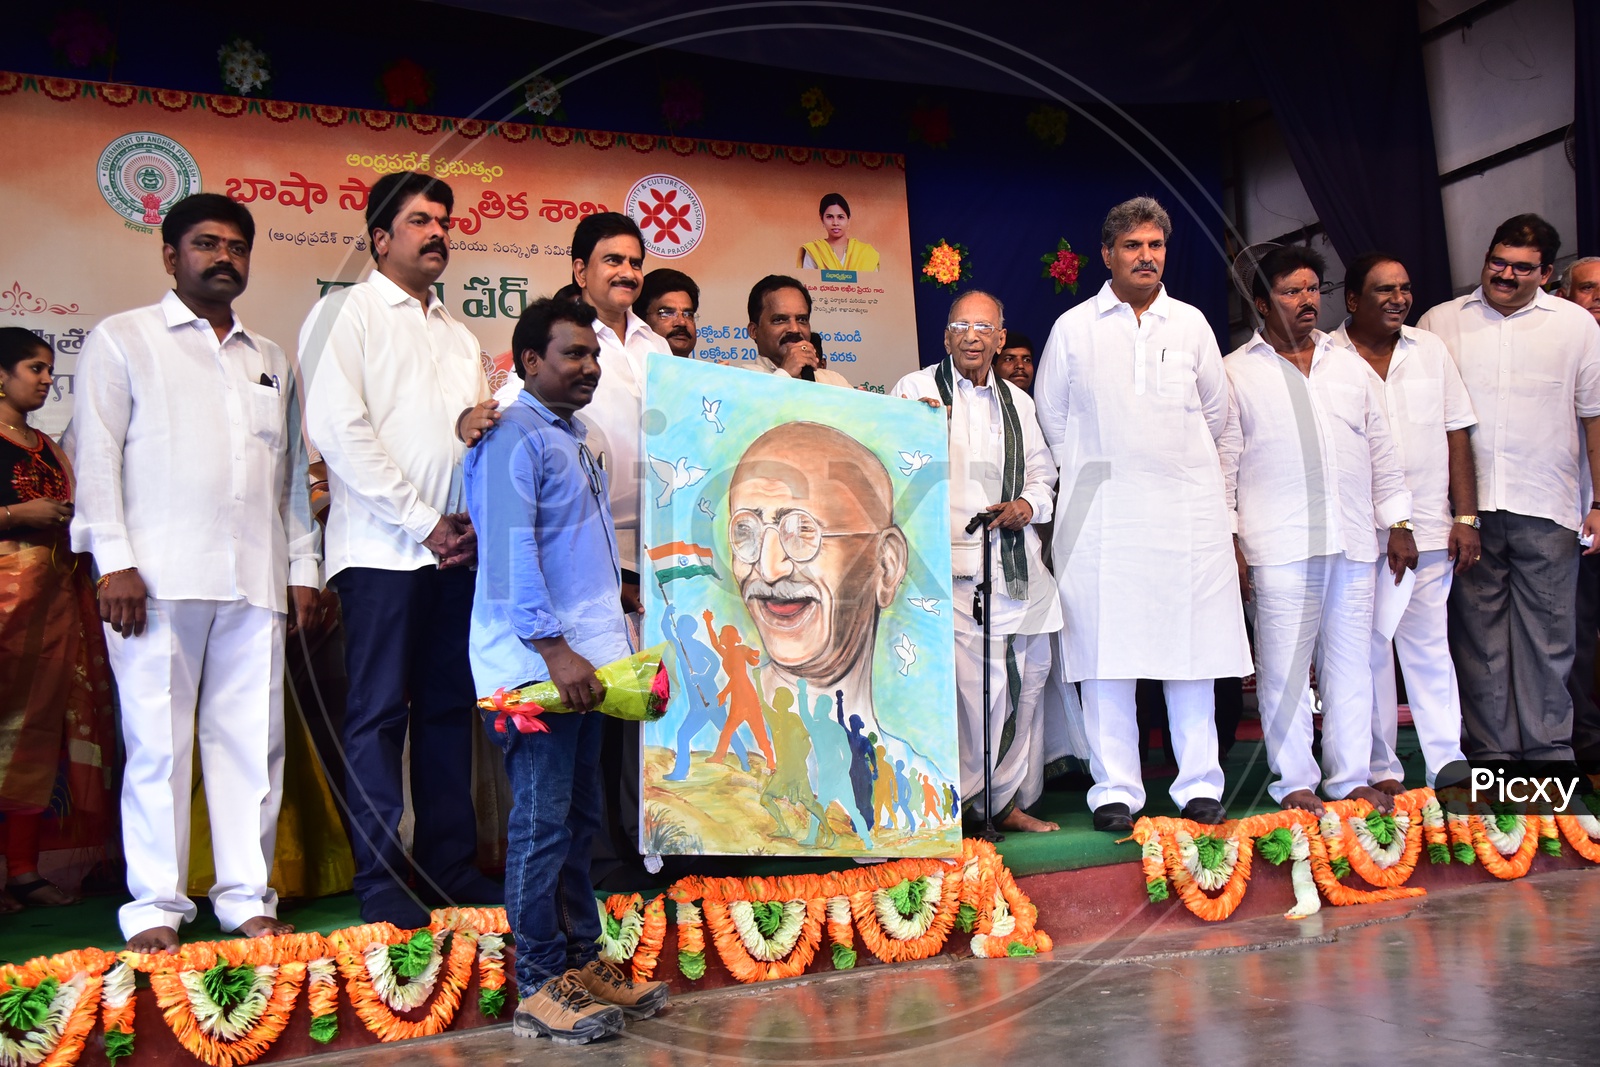 AP state creativity and culture commission awarding the prize